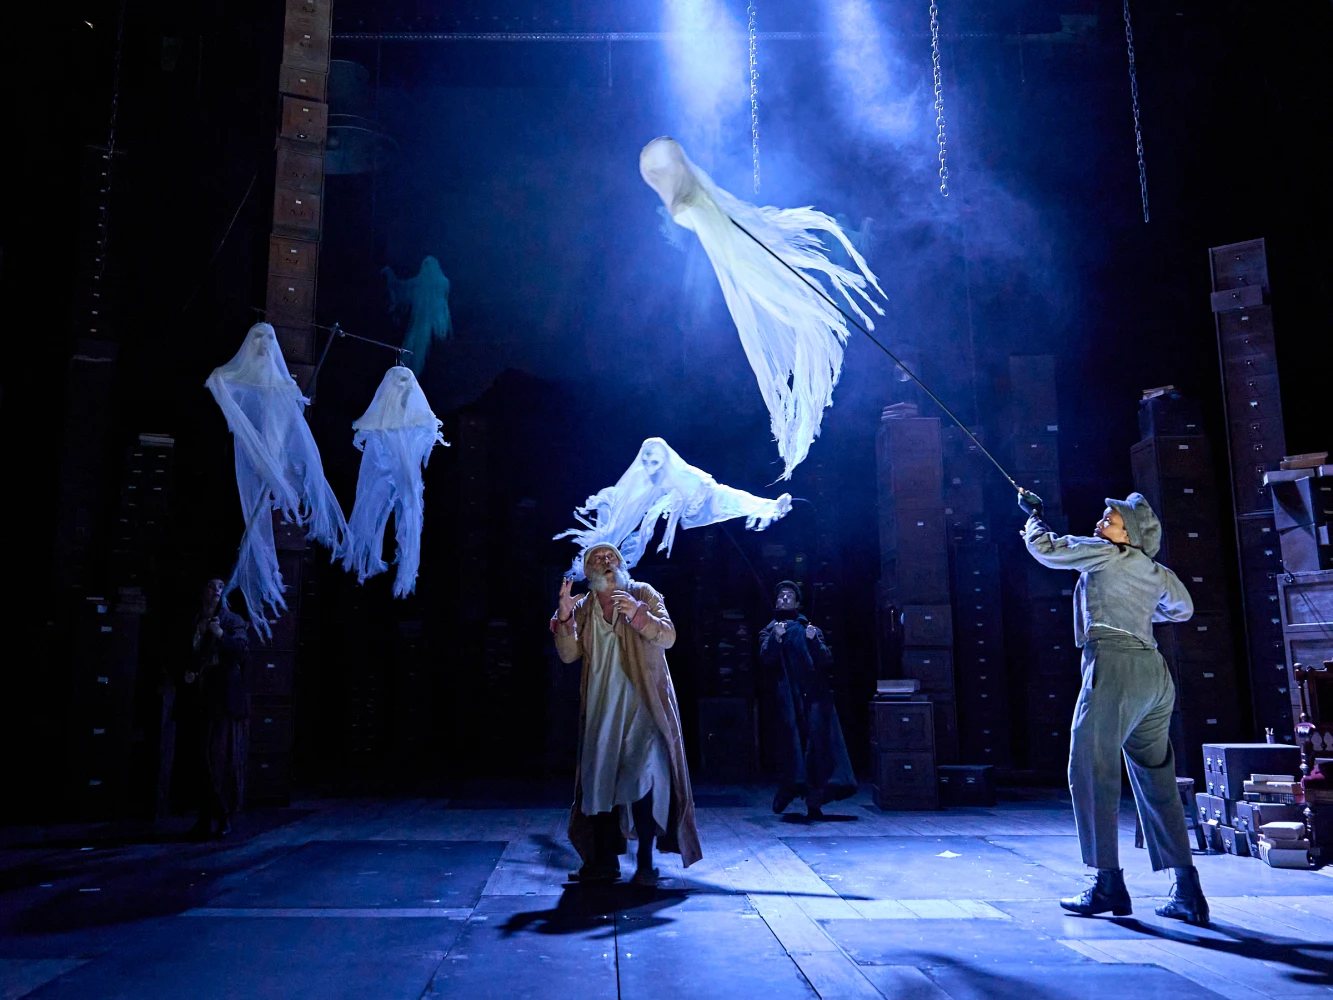 A Christmas Carol - A Ghost Story: What to expect - 3